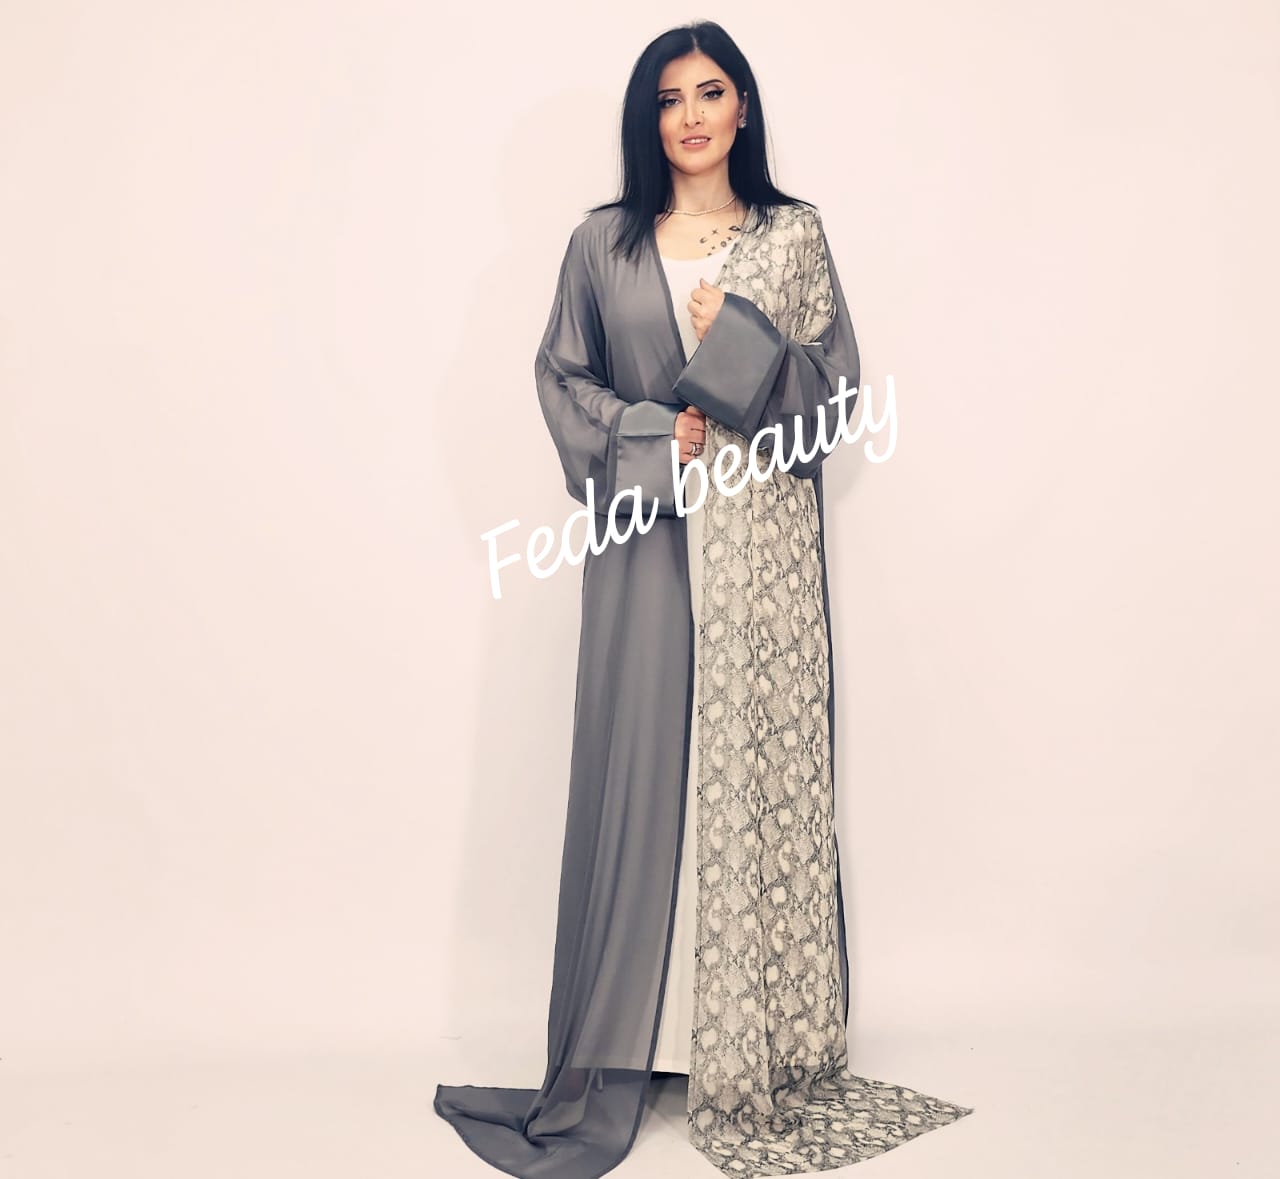 New Kuwaiti style abaya from the special and new Fady Beauty  collection for the year 2023